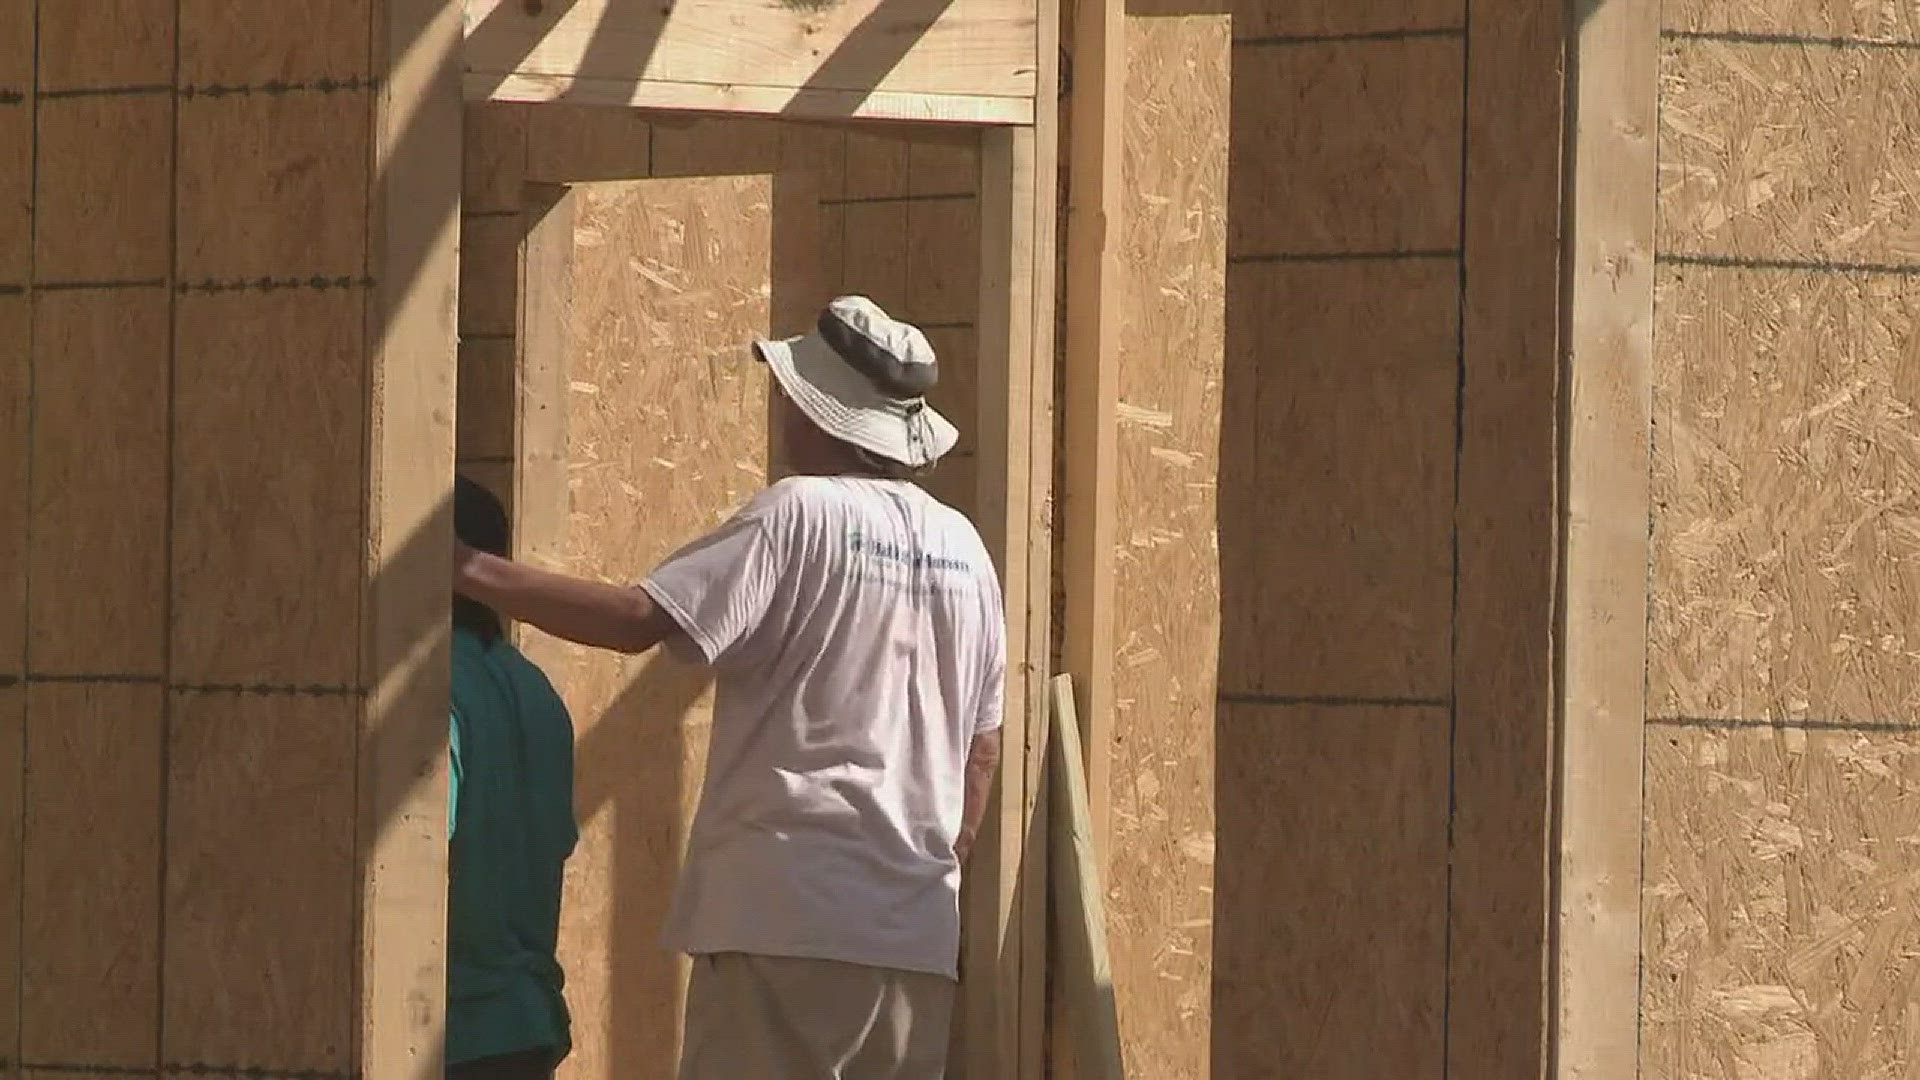 THV11 Habitat Home in North Little Rock moving one step closer to completion